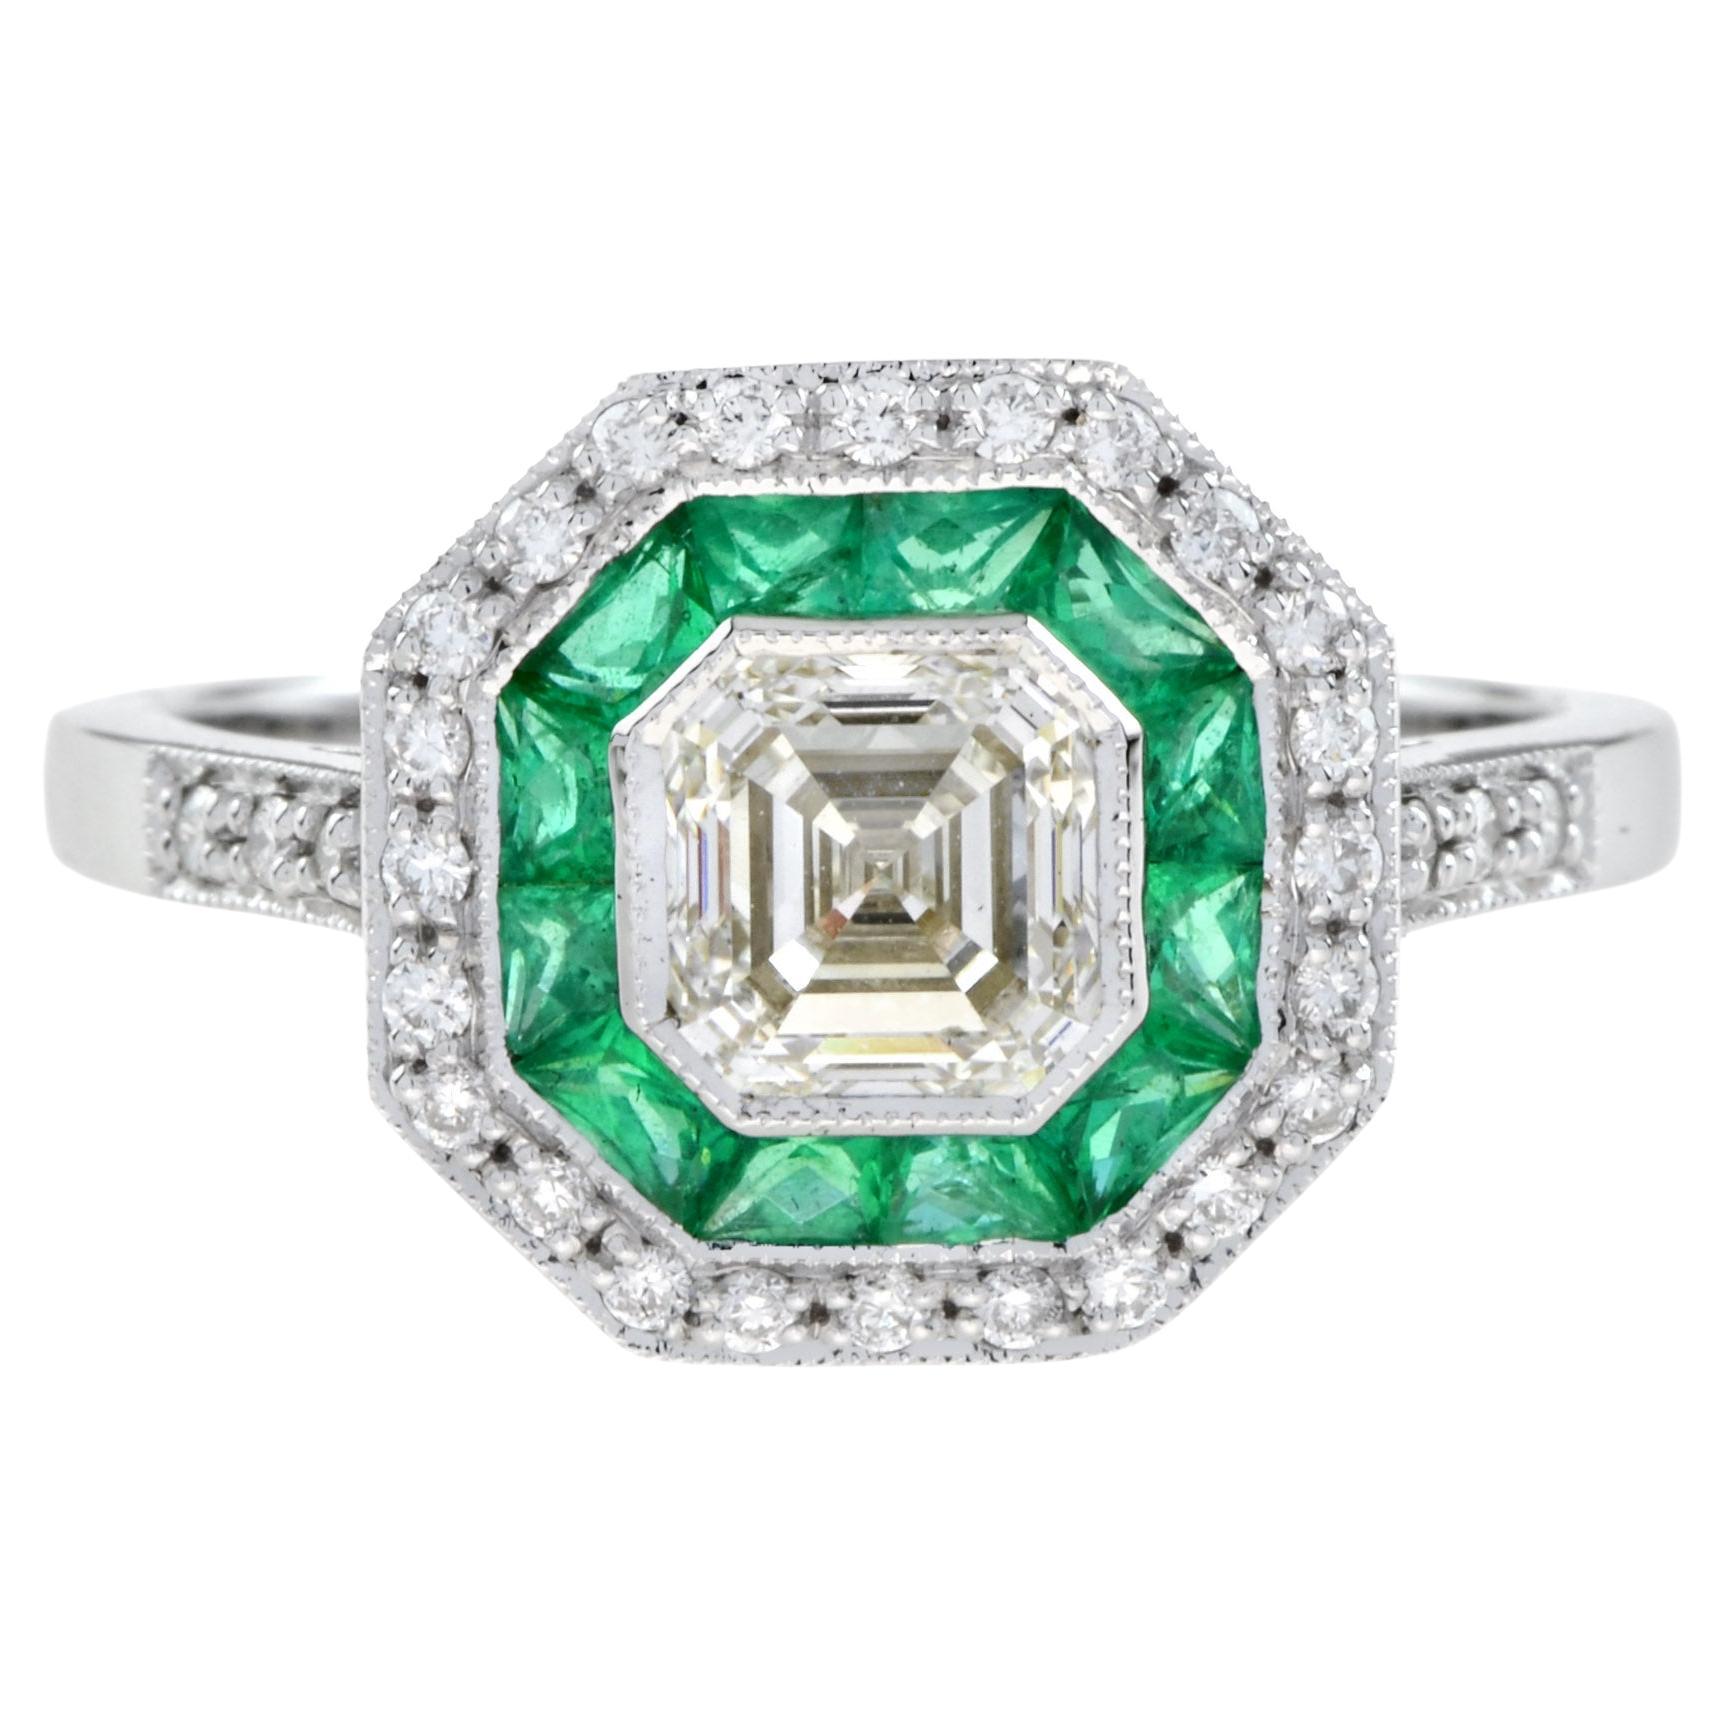 Art Deco Style Asscher Cut Diamond and Emerald Engagement Ring in 18K White Gold